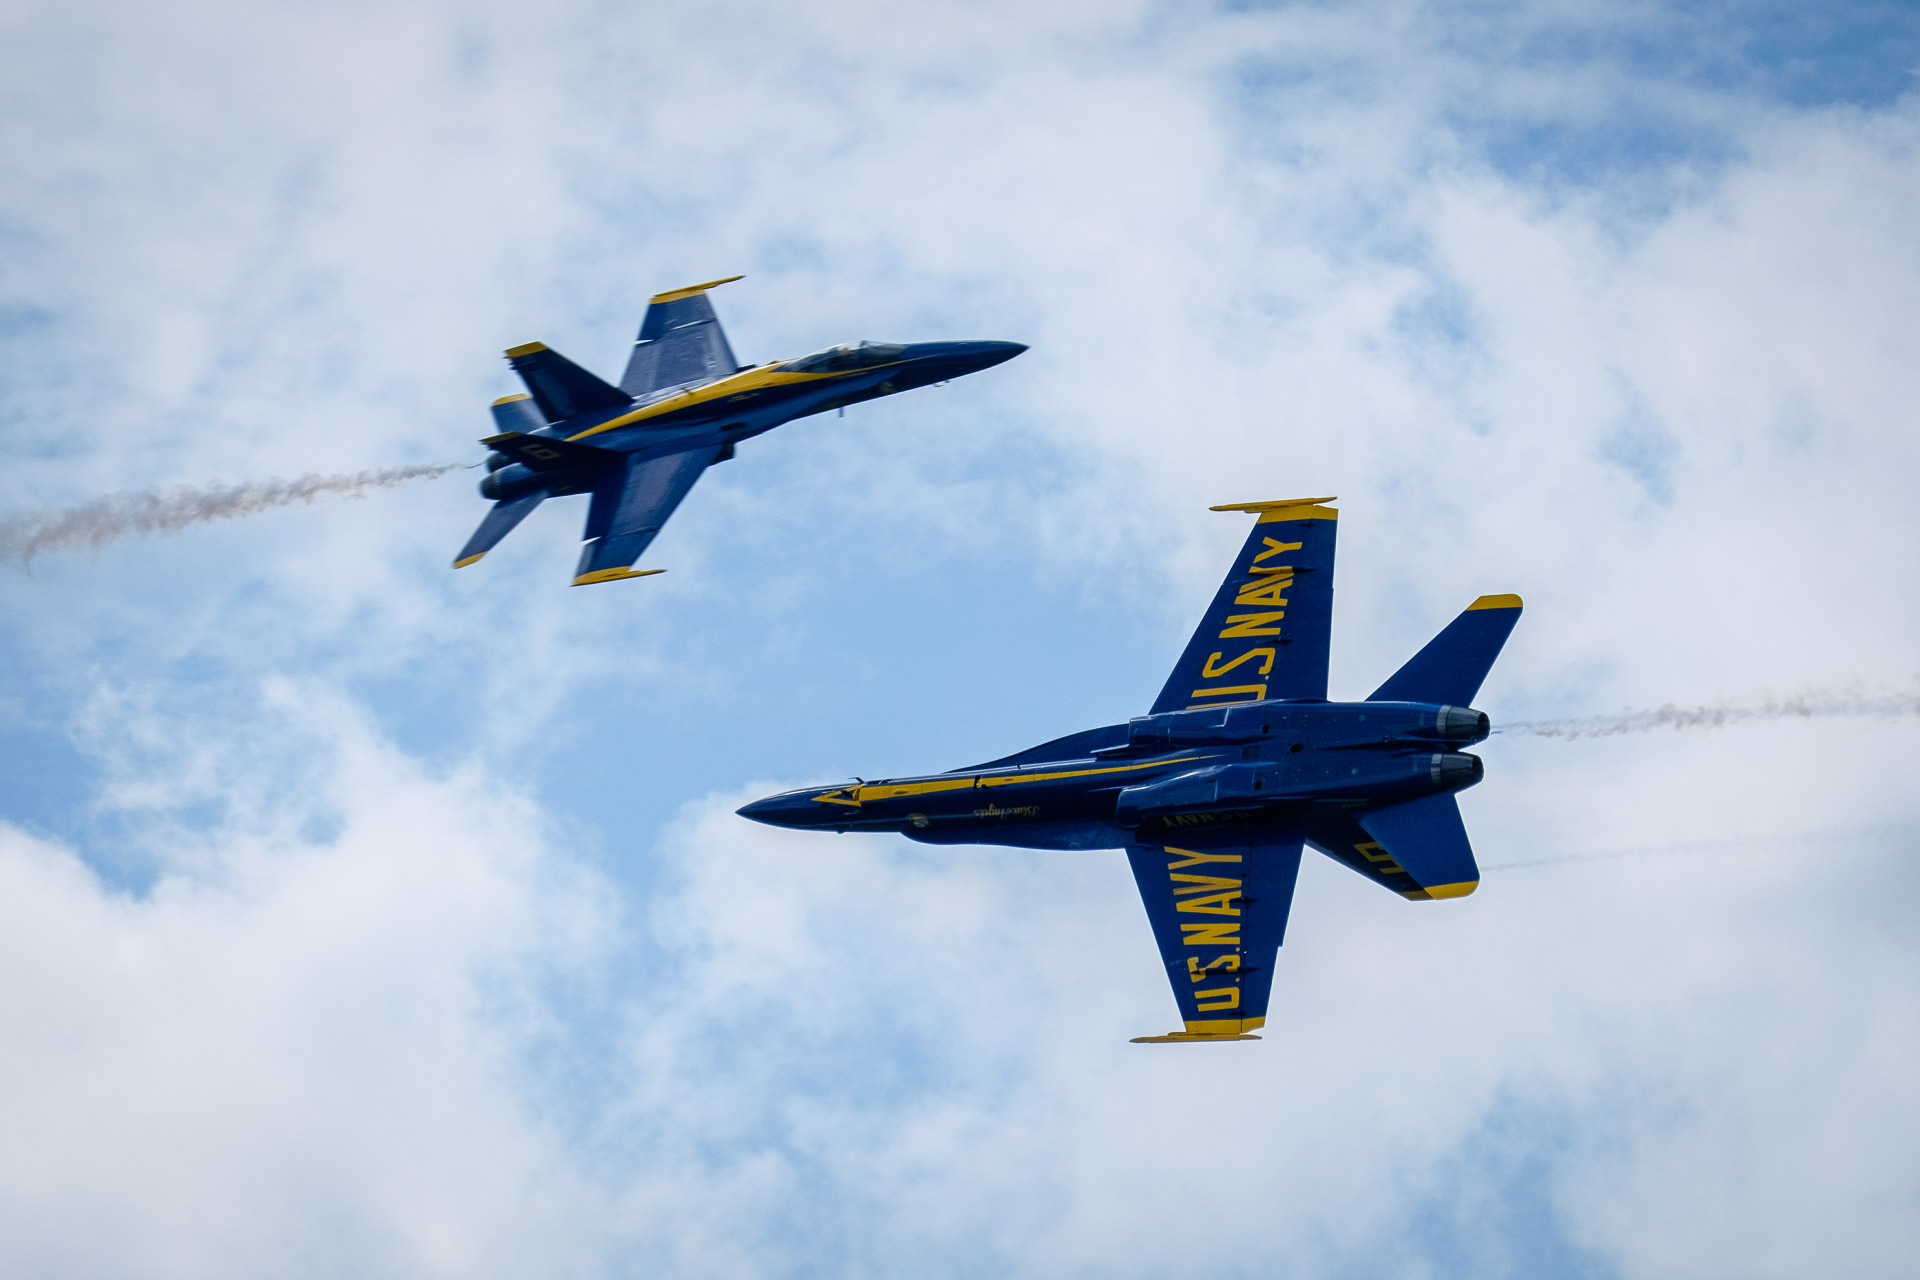 Blue Angels in Key West a7iii with 100400mm GM r/SonyAlpha